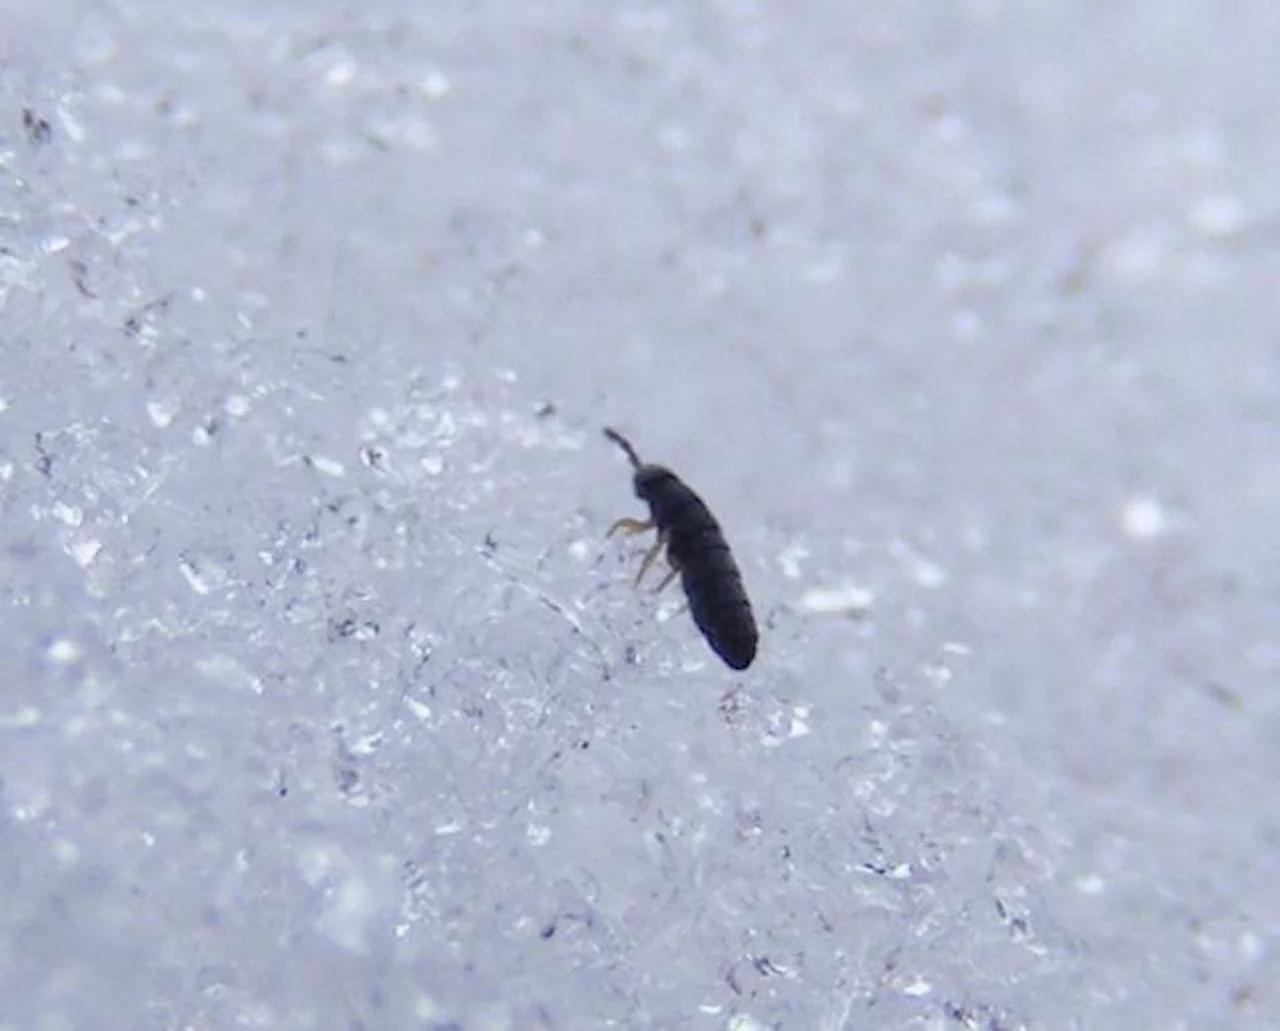 No need to flee from a snow flea (which isn't a flea)